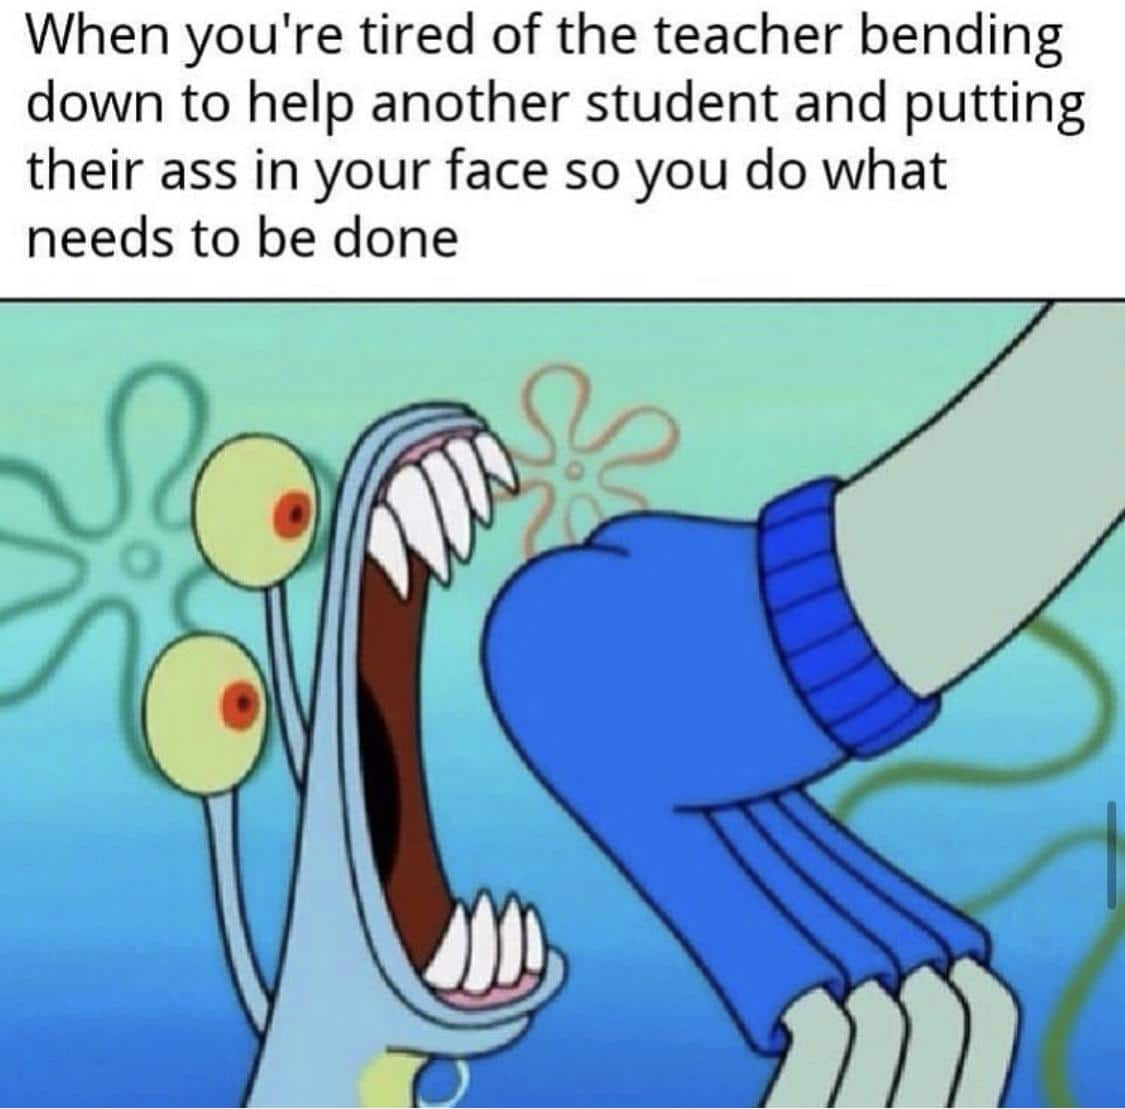 spongebob spongebob-memes spongebob text: When you're tired of the teacher bending down to help another student and putting their ass in your face so you do what needs to be done 